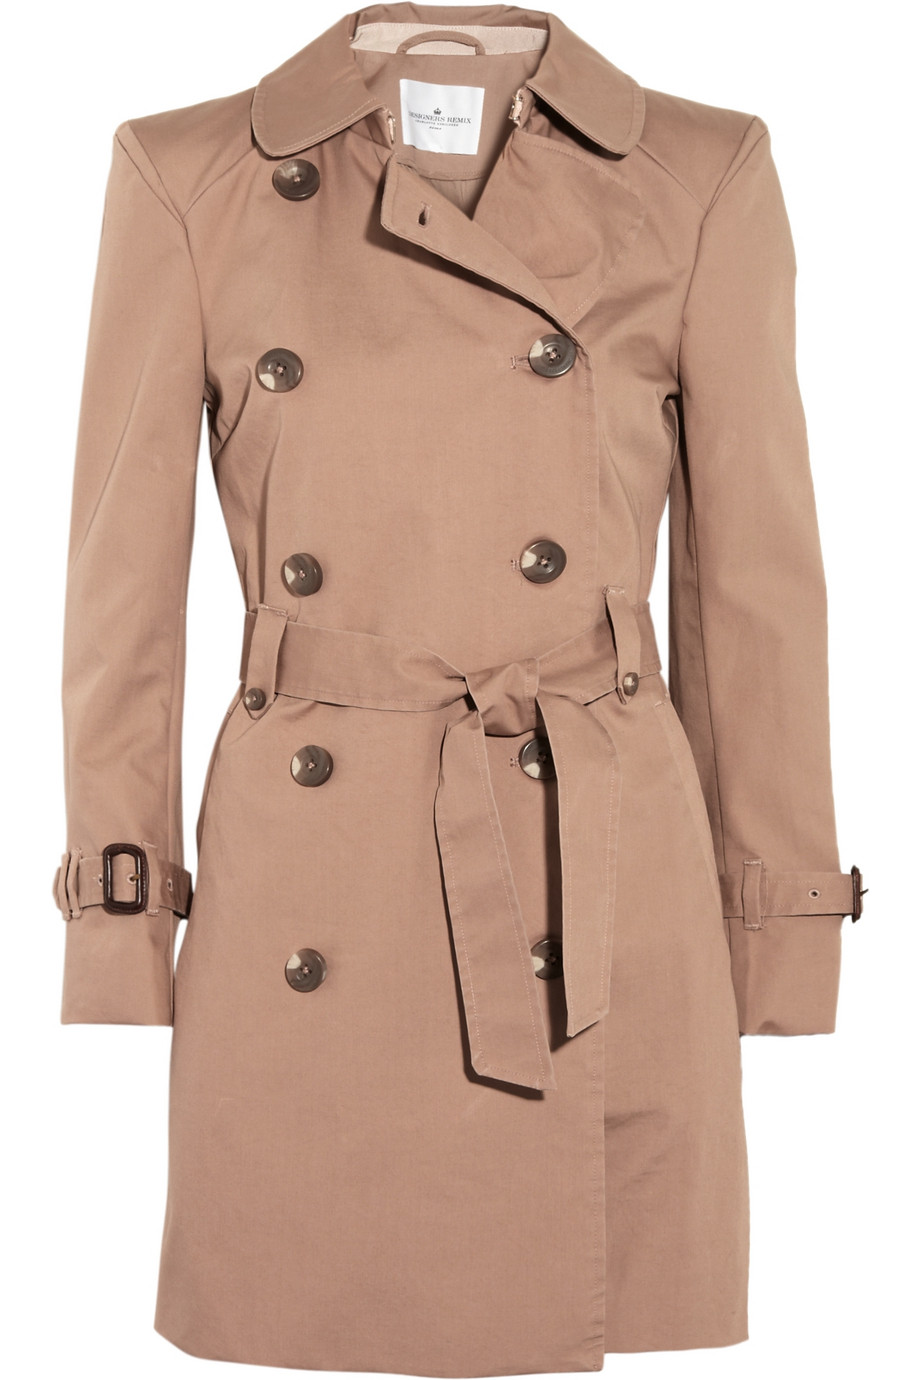 Designers Remix Vanilla Cotton Trench Coat in Pink (rose) | Lyst